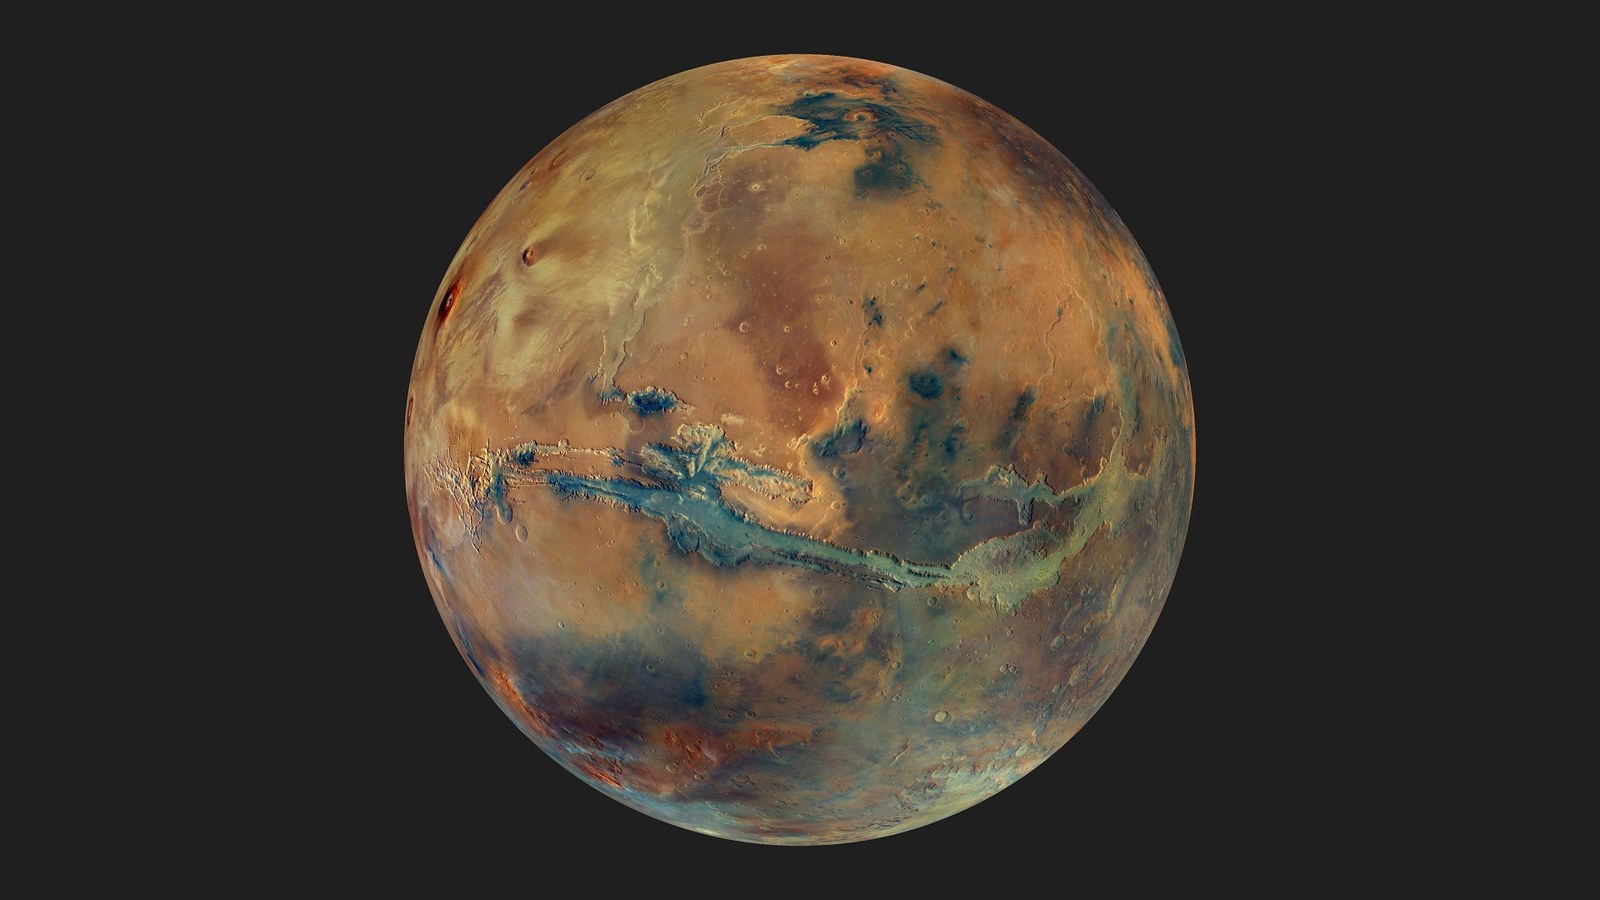 https://www.dlr.de/en/latest/news/2023/02/mars-in-colour-as-never-seen-before/simulated-view-of-the-hrsc-colour-mosaic/@@images/image-1600-799af8d16c391d1b9aada552e5a86f59.jpeg